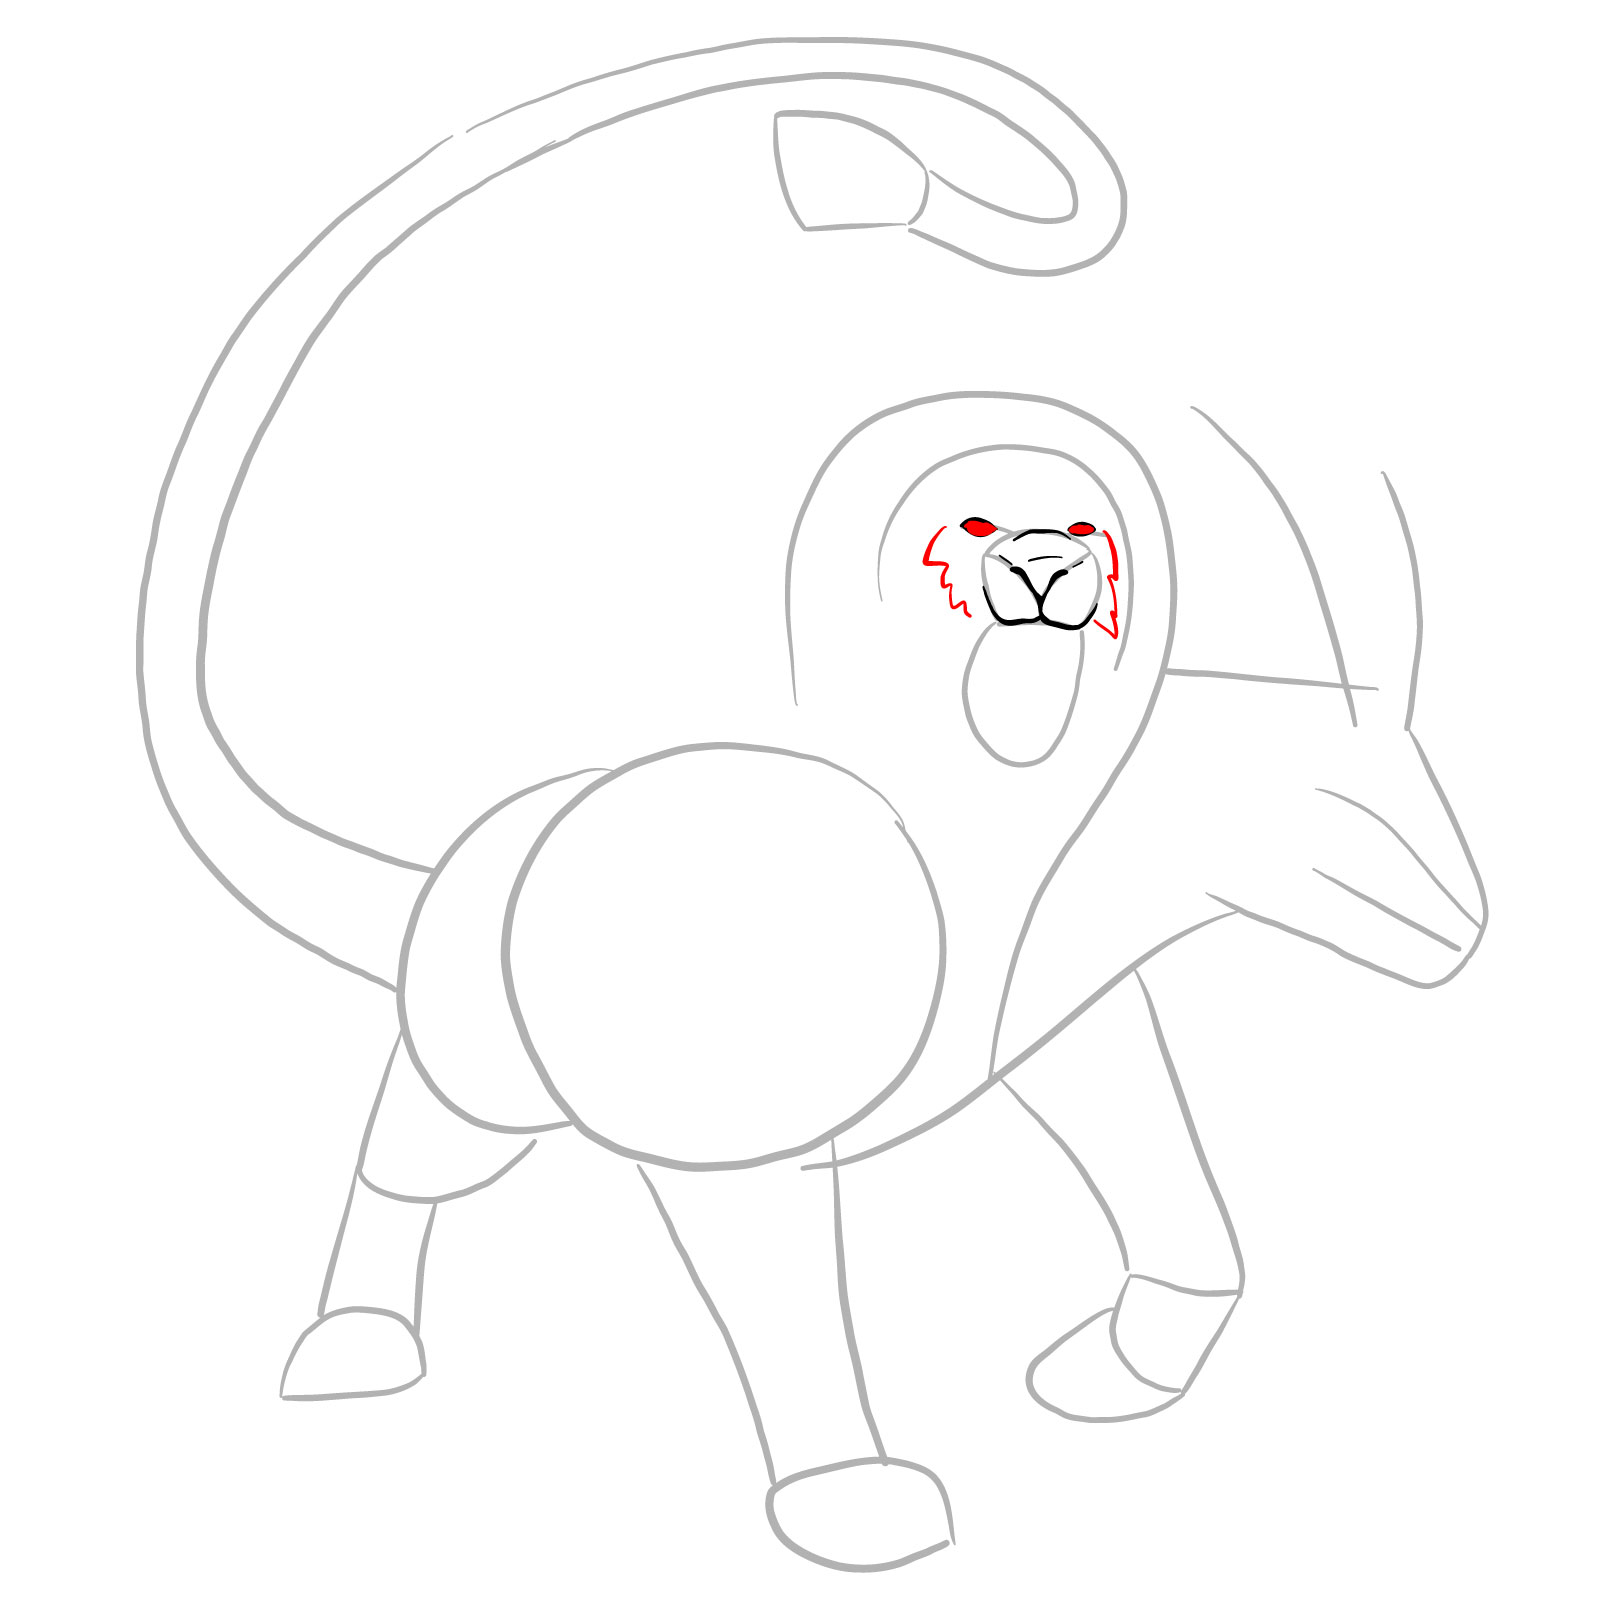 How to draw a Chimera - step 06